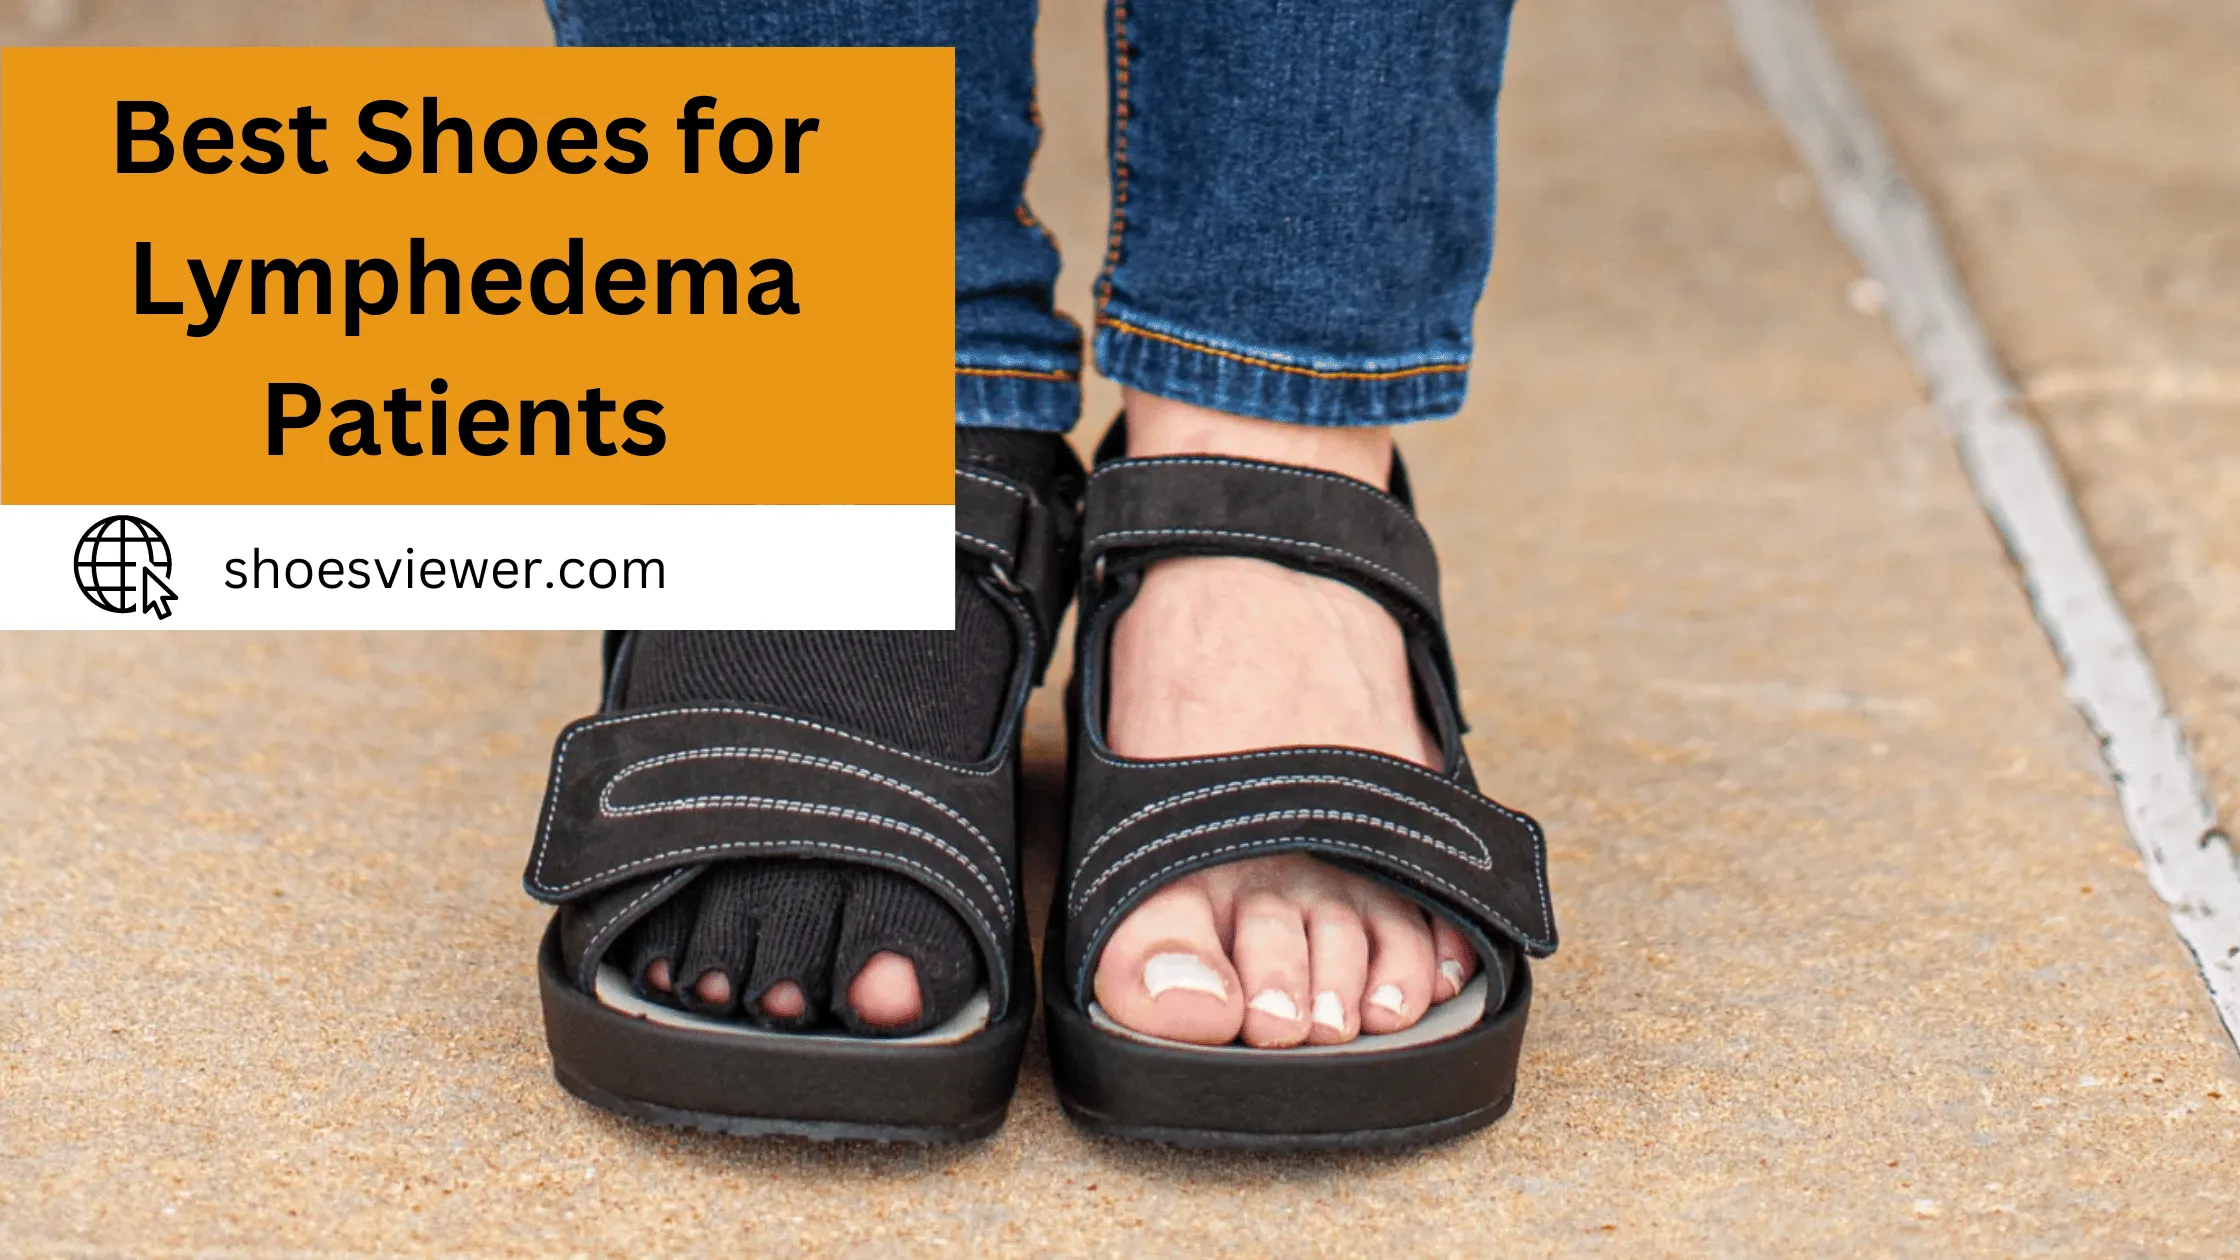 Best Shoes for Lymphedema Patients - Latest Guide